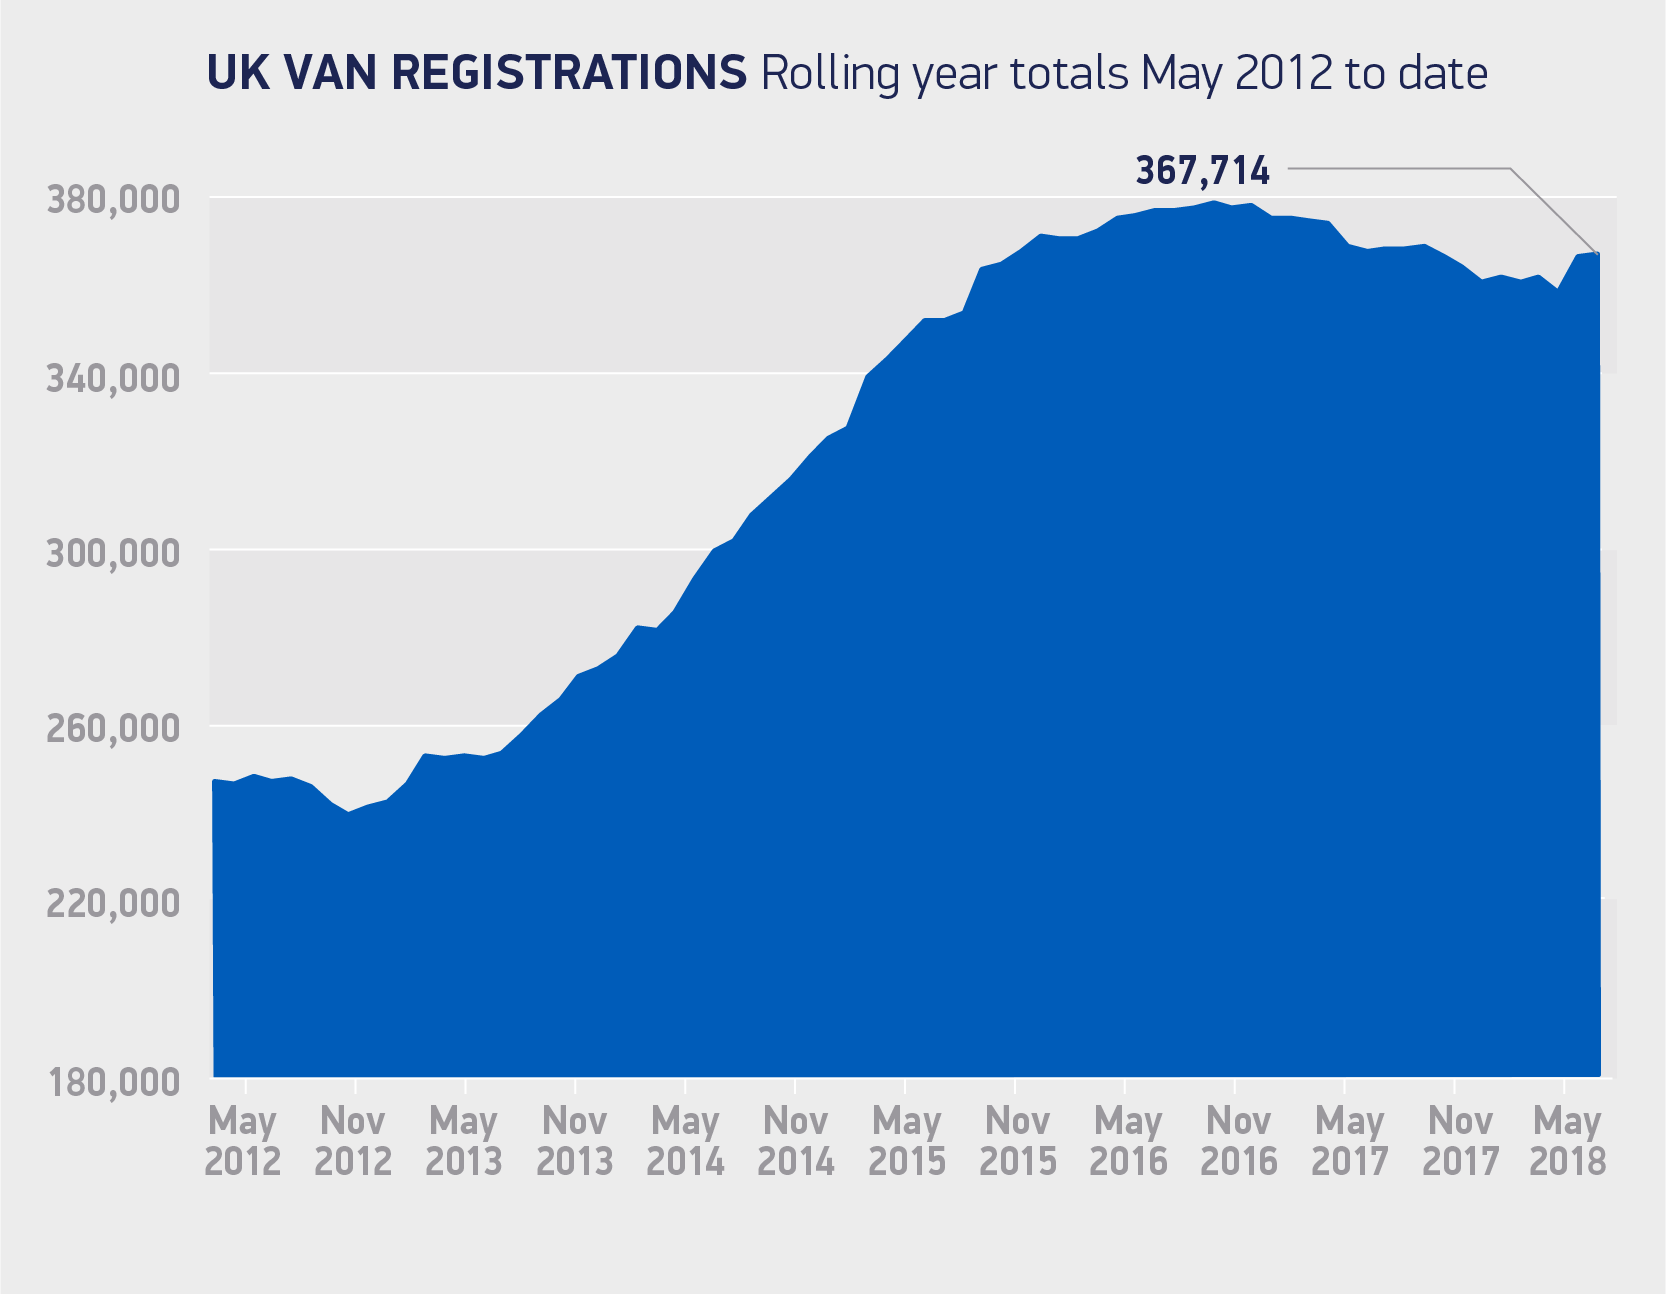 Van registrations rolling year totals May 2012 to-date 2018 chart